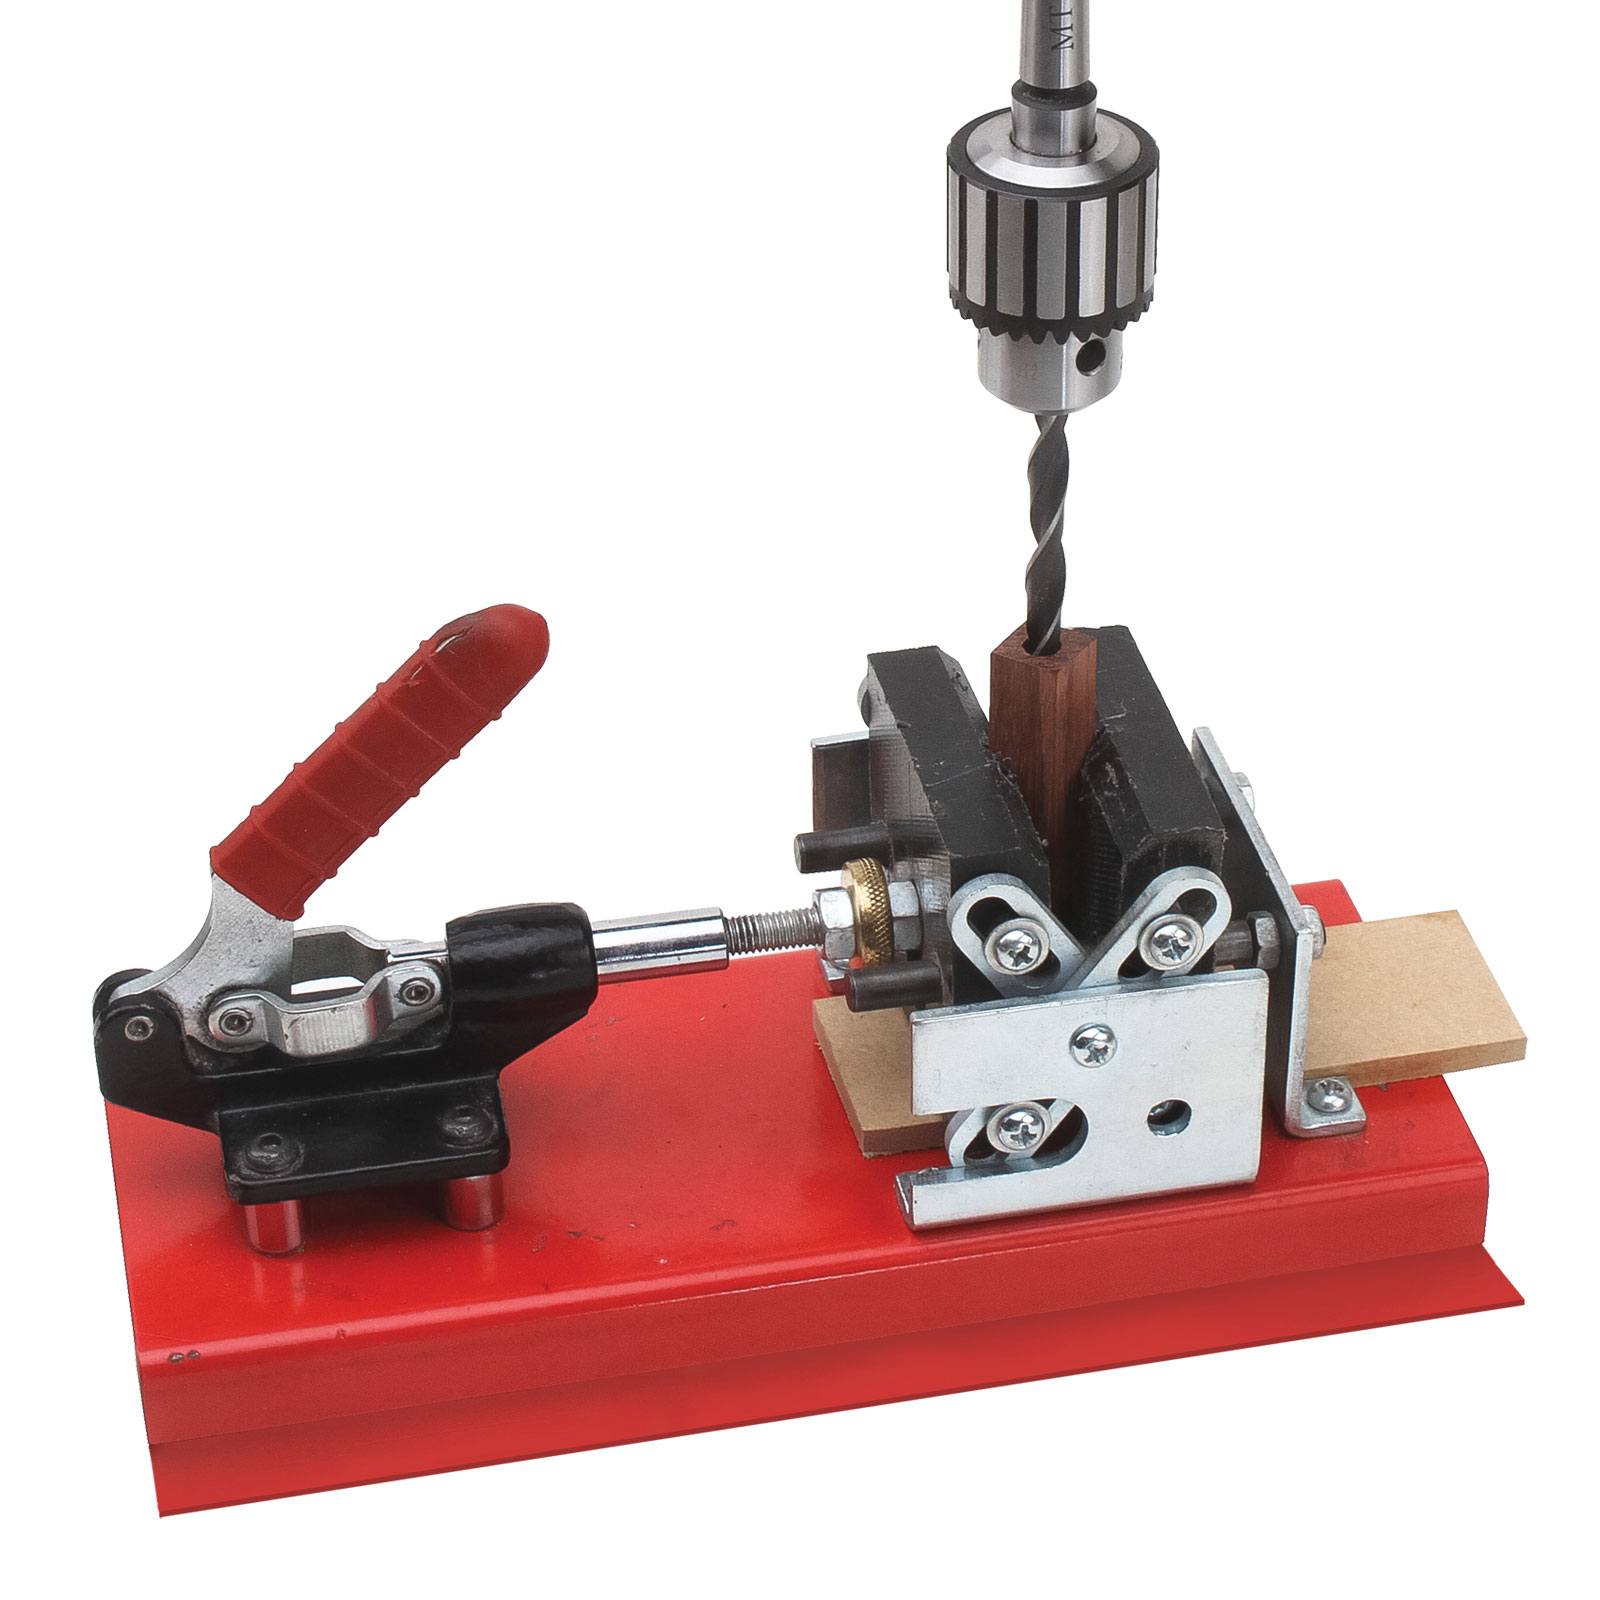 PEN VISE BY PEACHTREE WOODWORKING PW7003 